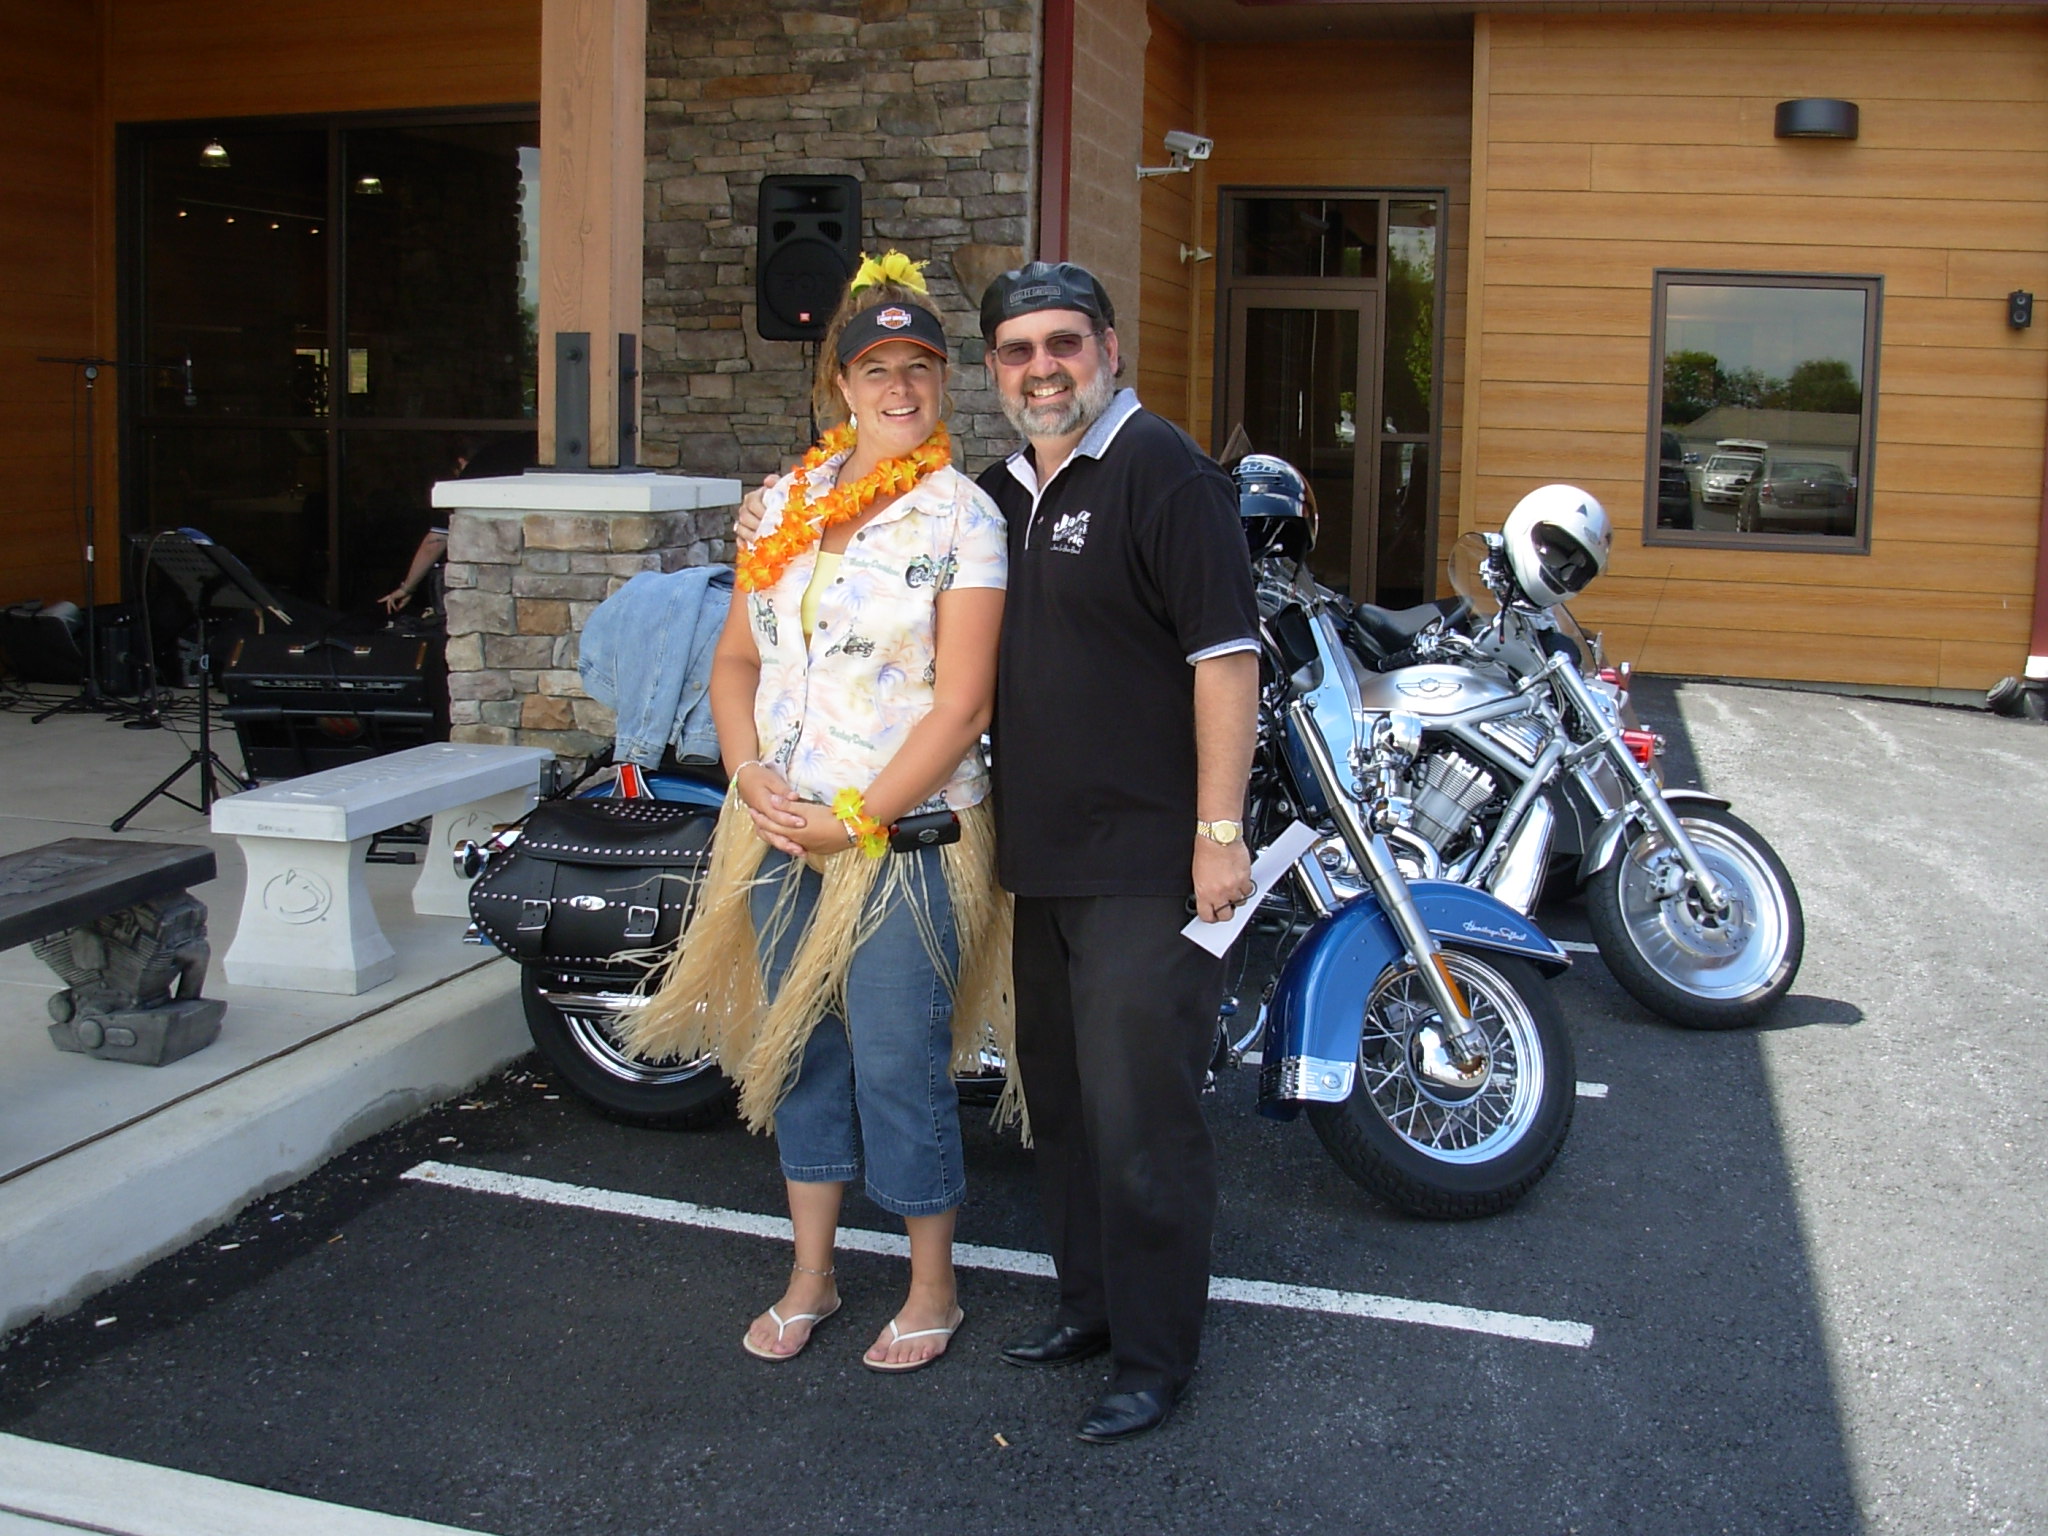 Cathy Delp is "skirting" around at Appalachian H-D
